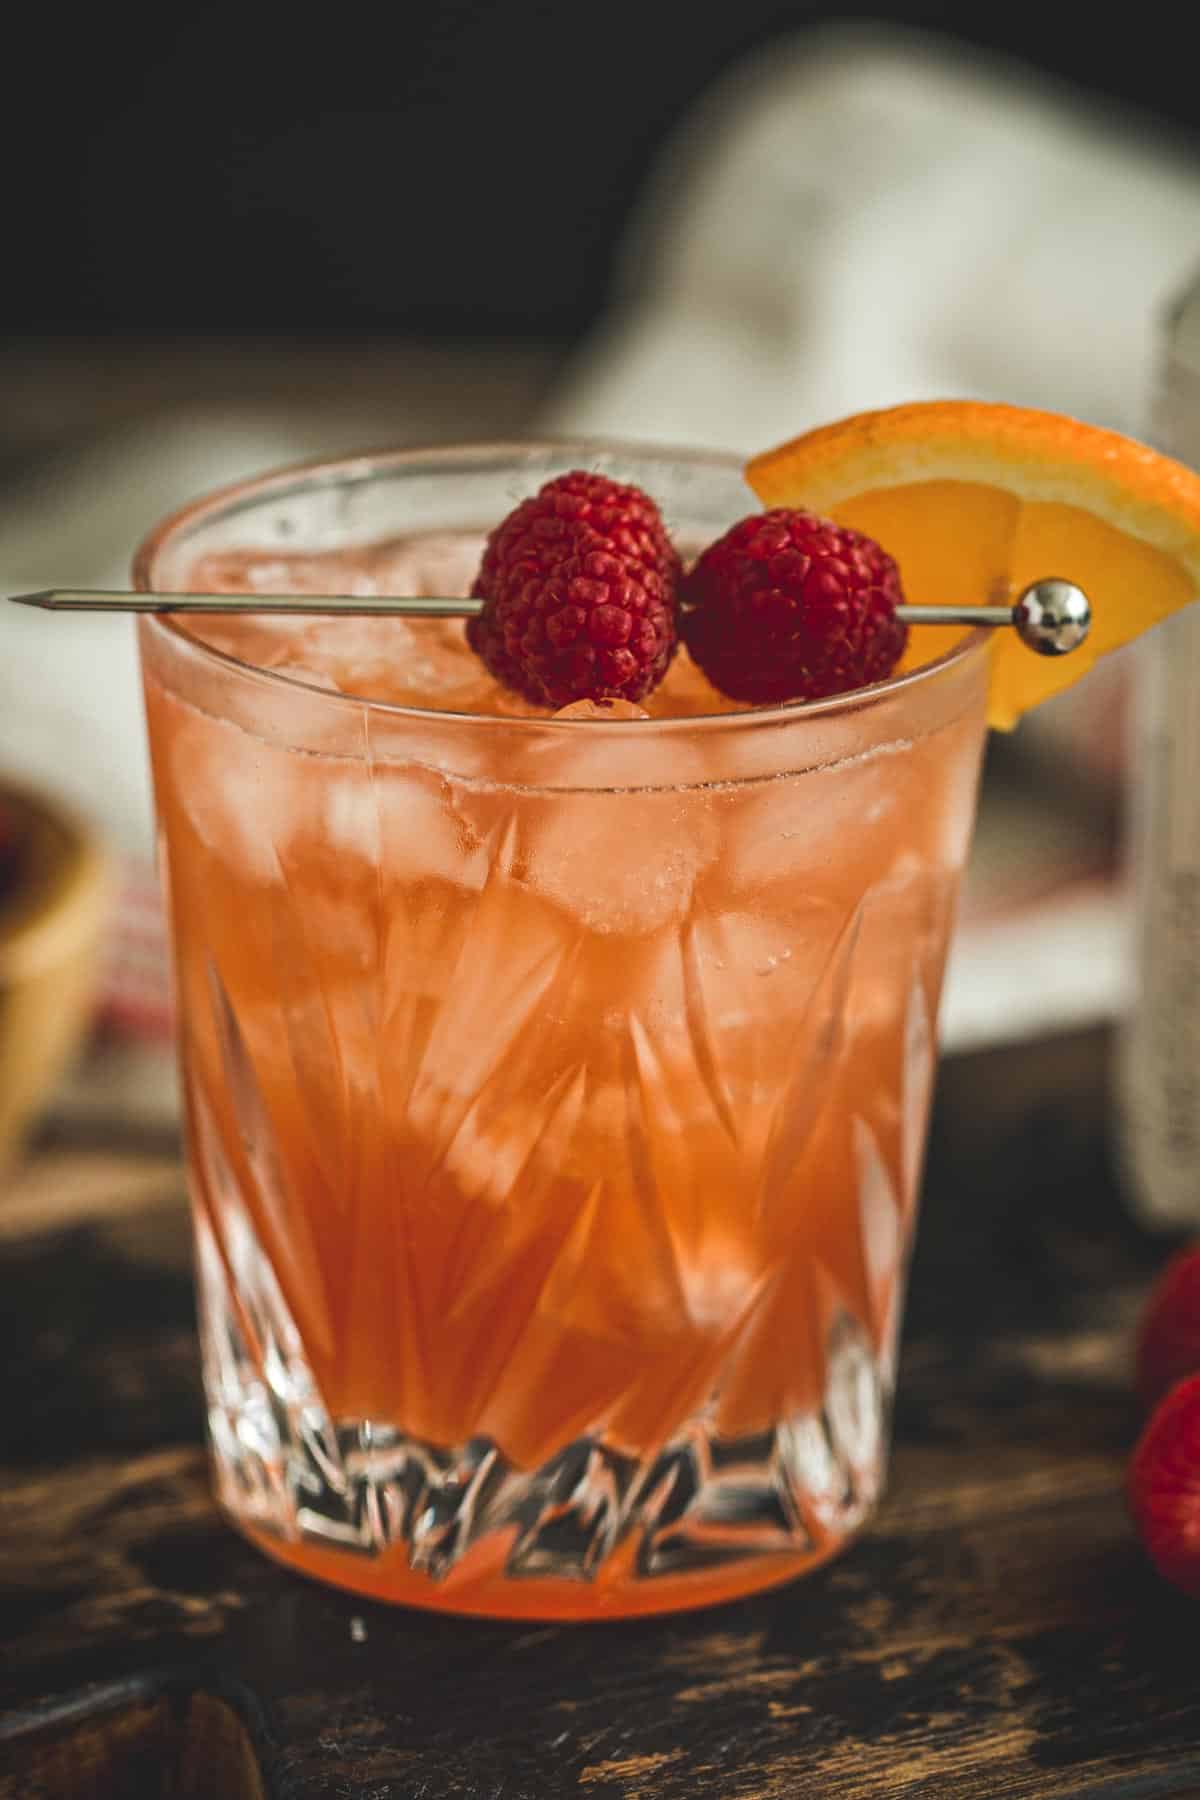 Raspberry sour cocktail with fresh raspberries and an orange wedge for garnish.